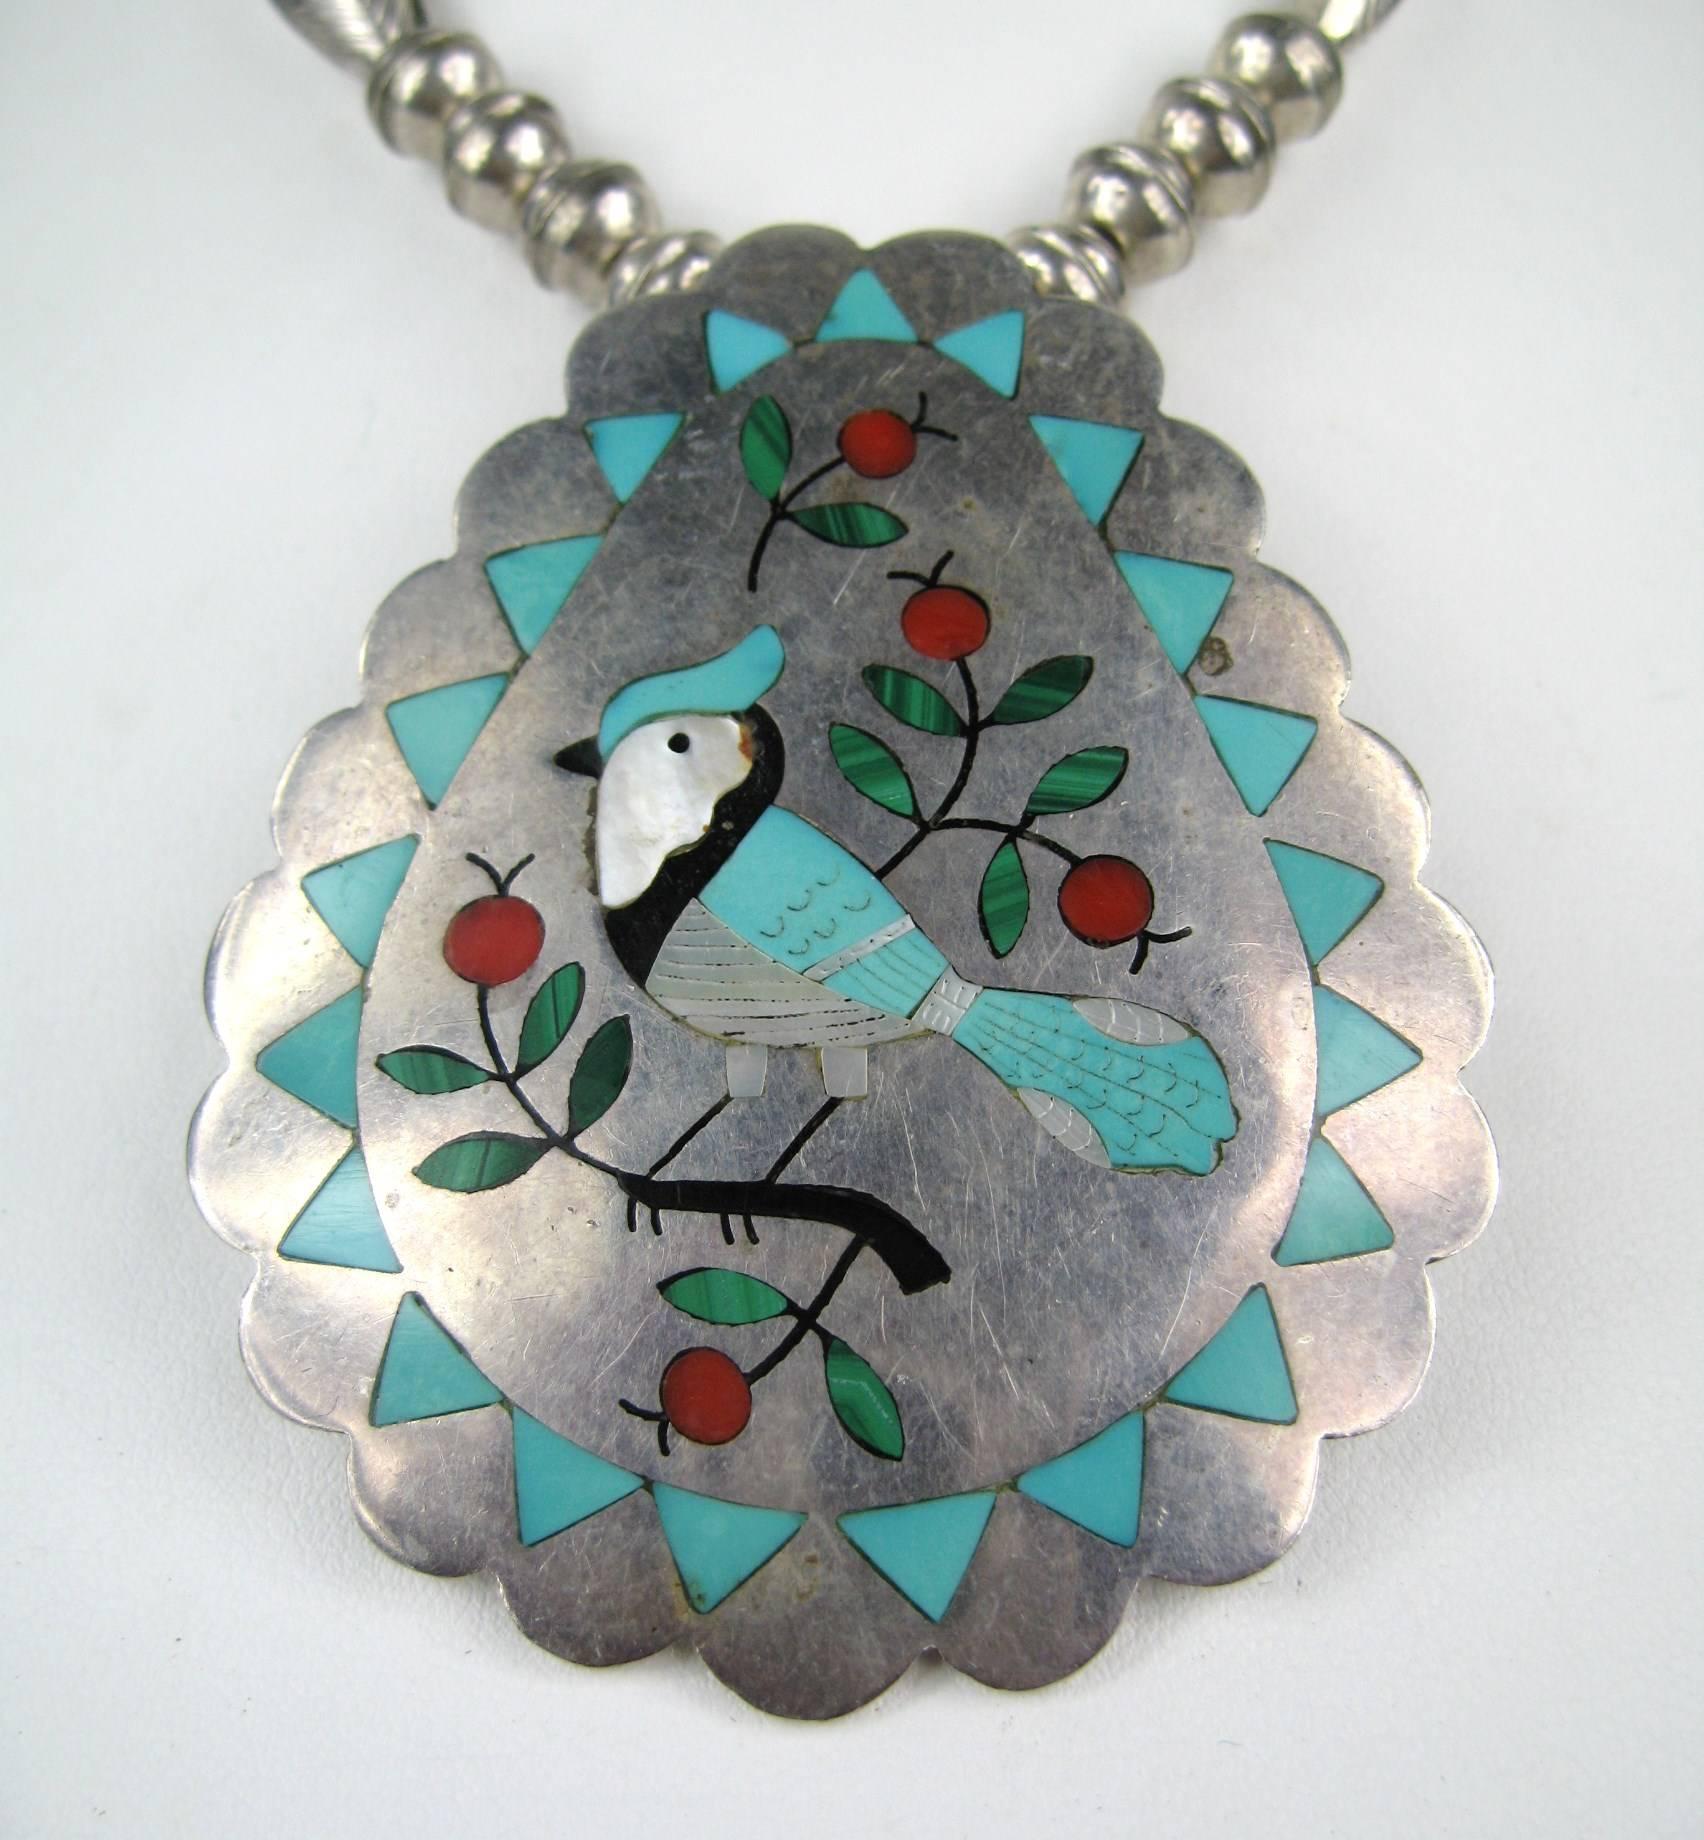 Sammy and Esther Guardian Blue Jay Motif Pendant set in Sterling Silver. Inlaid with Turquoise and coral.  The Pendant attached to a beaded necklace Hallmarked on the back. Measures 2.60in  x 2.10 in and the necklace is 22 inches end to end. This is